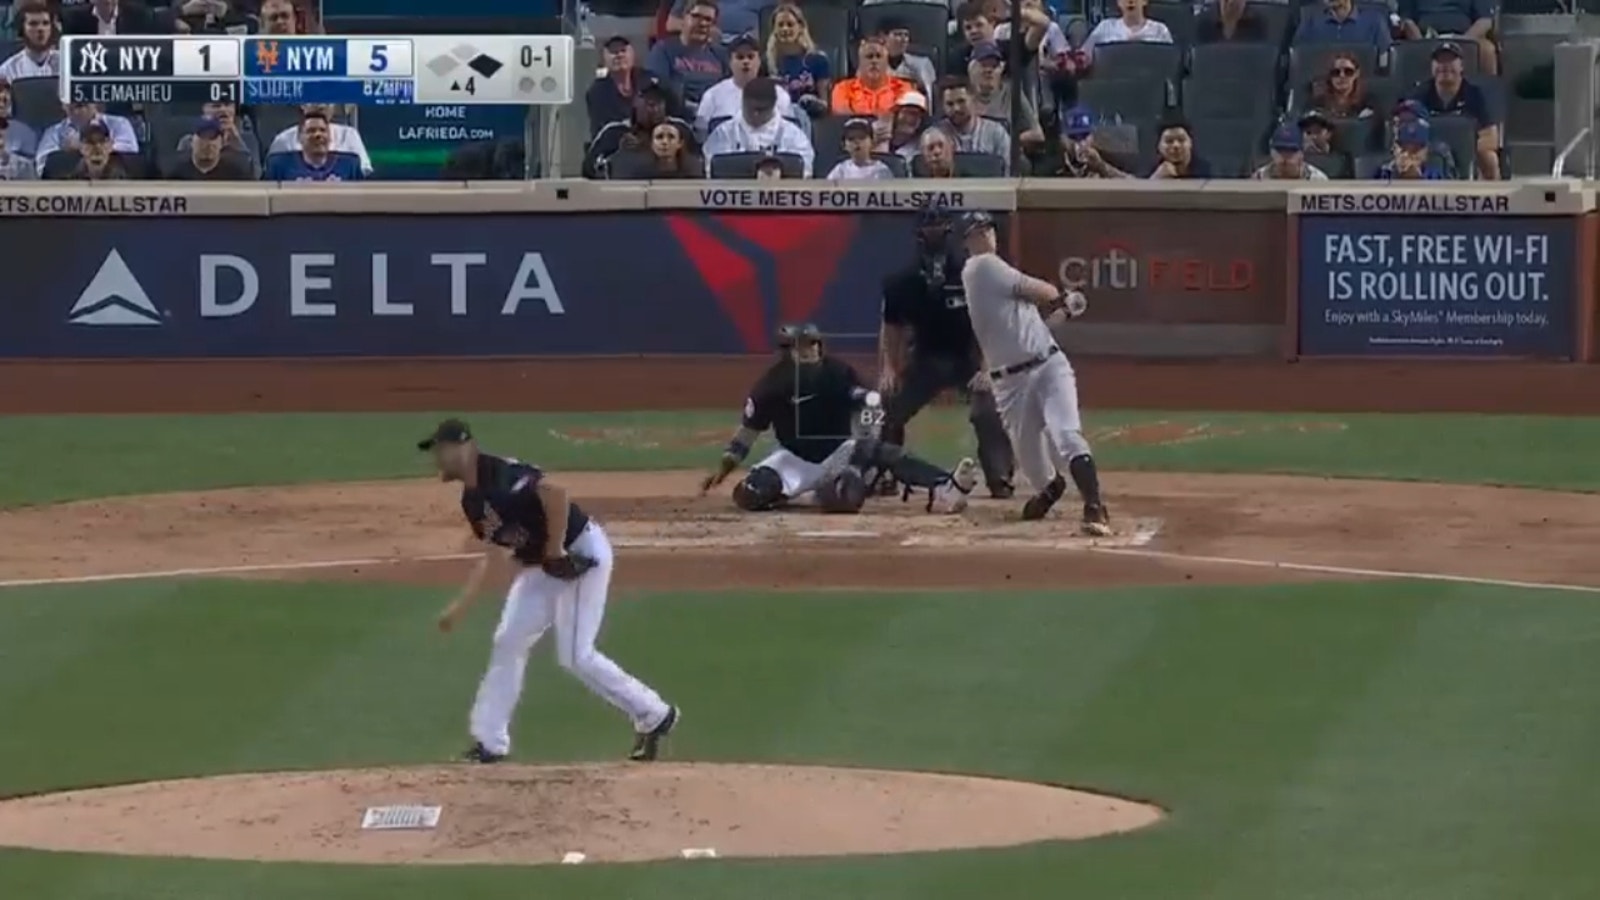 Yankees' DJ LeMahieu belts a two-run homer against the Mets